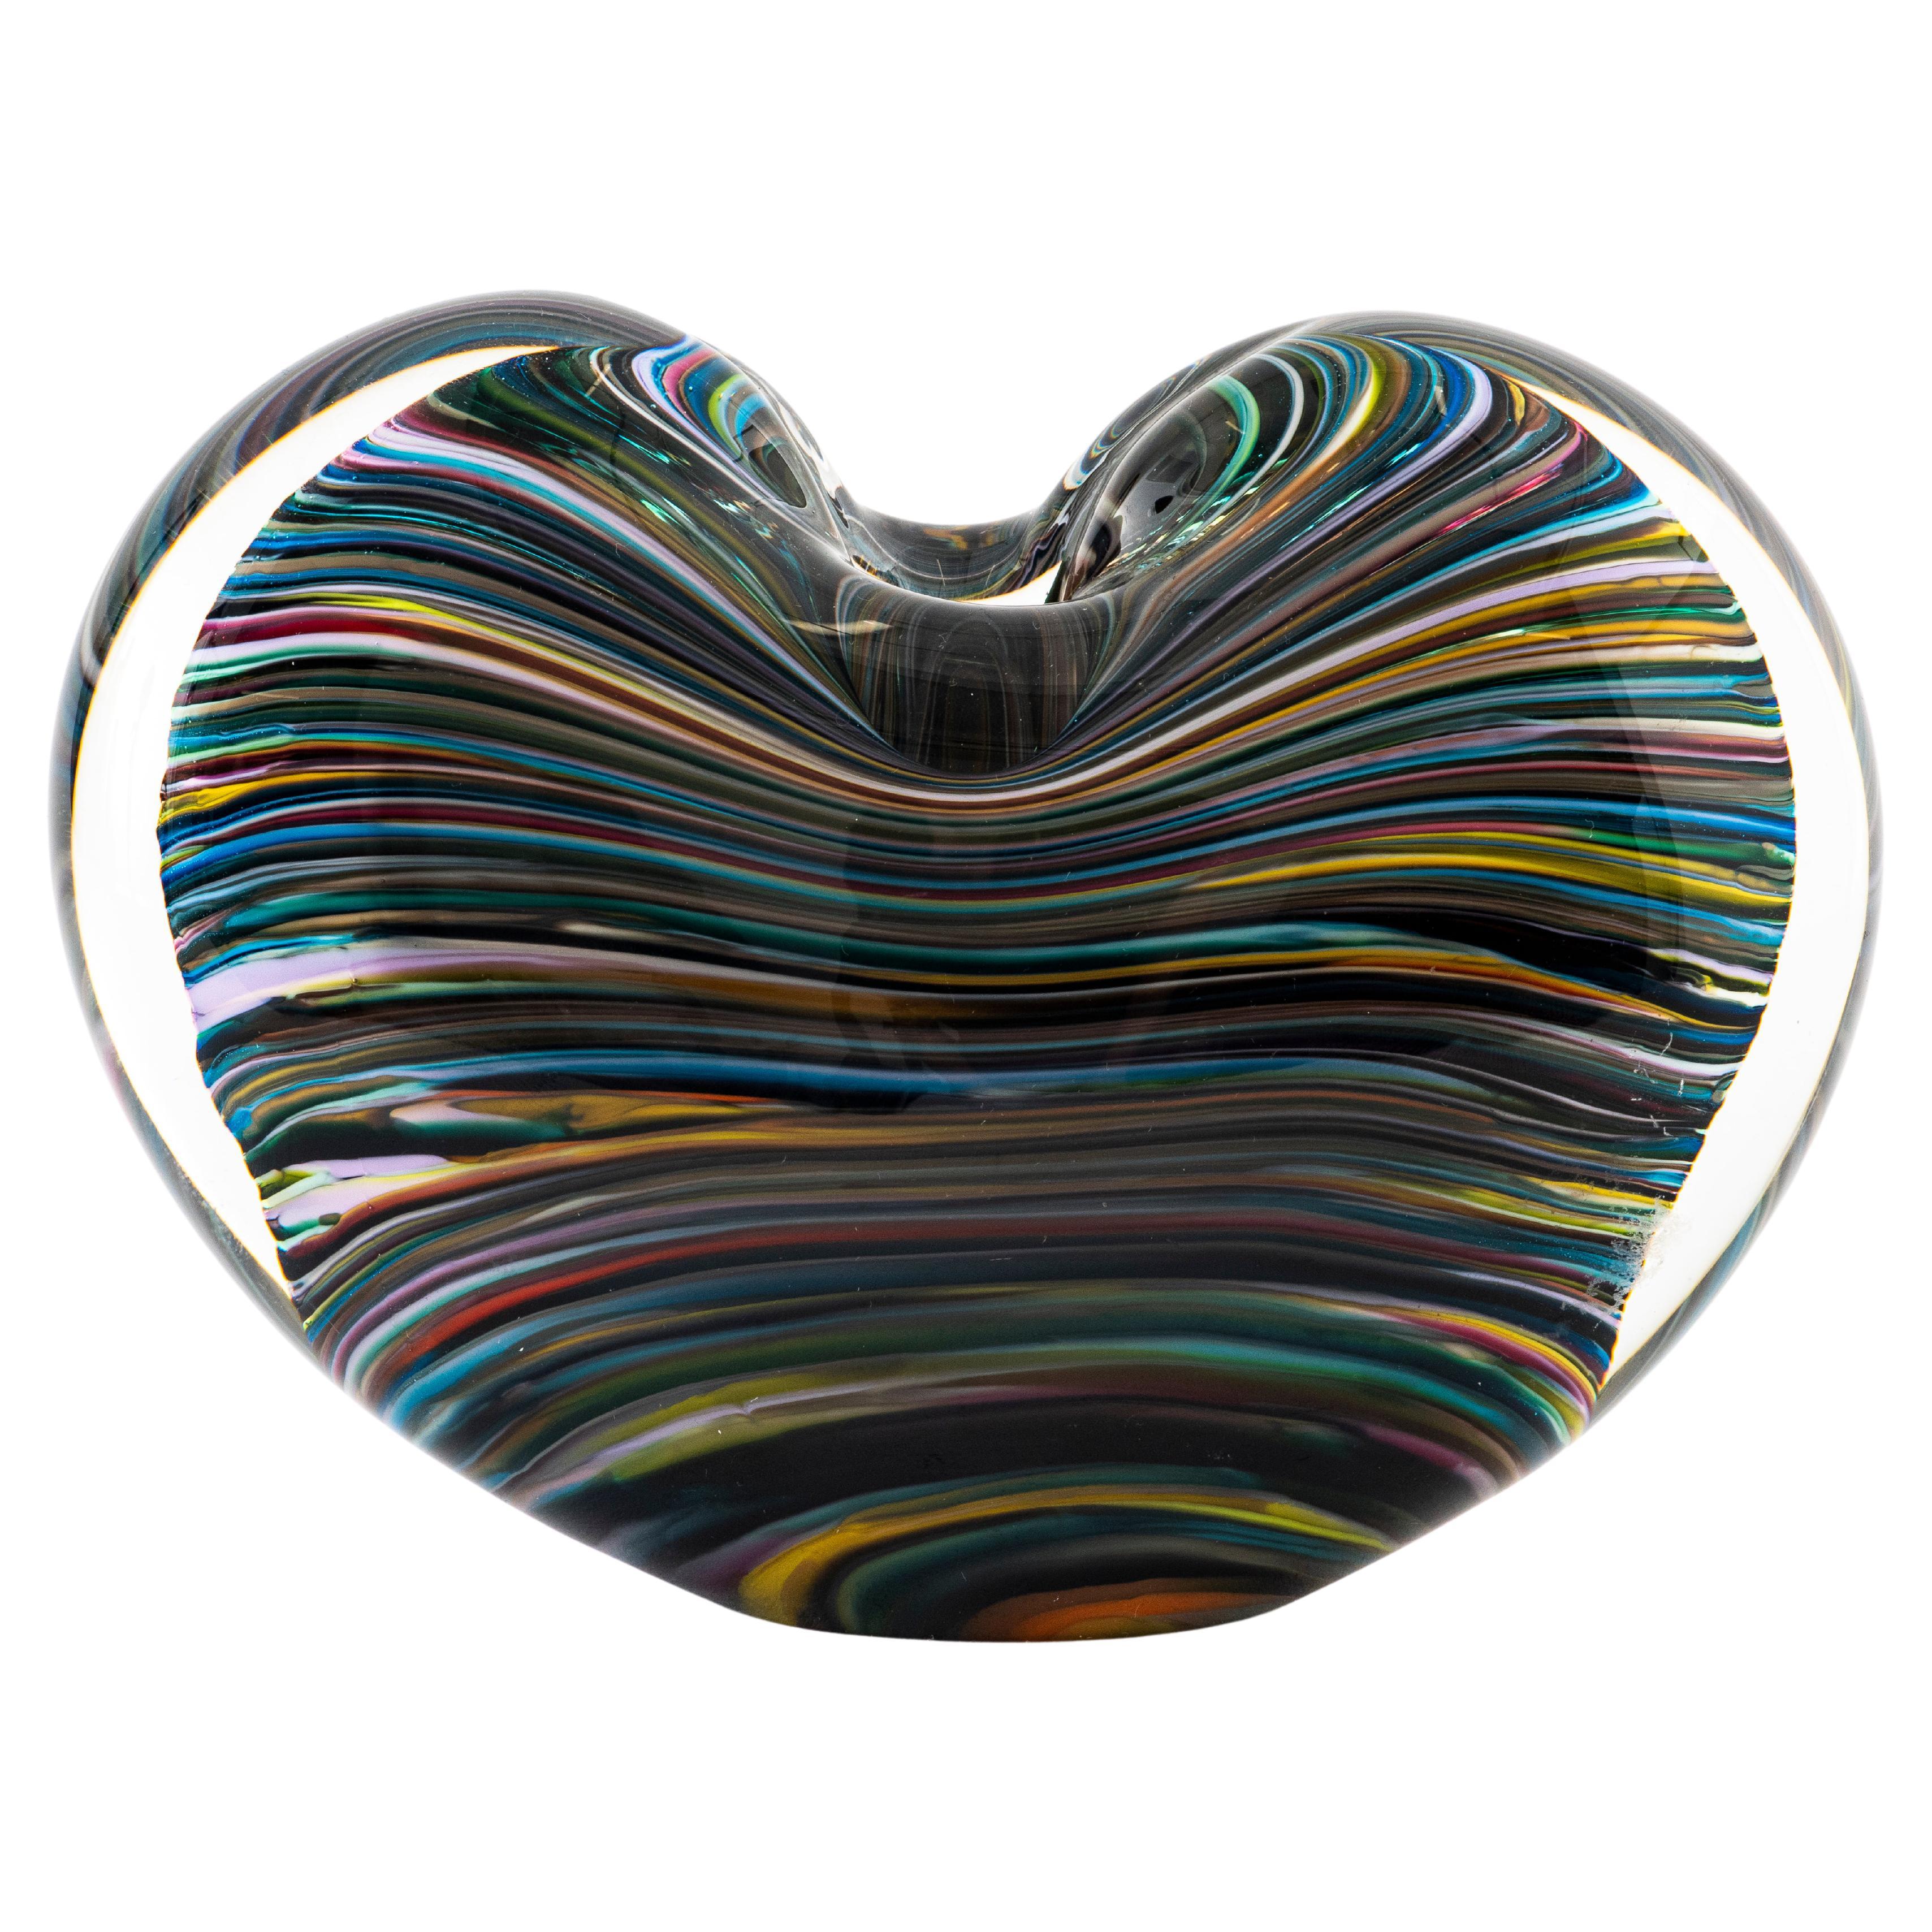 Caleb Siemon Hand-Blown Striped Heart Bud Vase For Sale